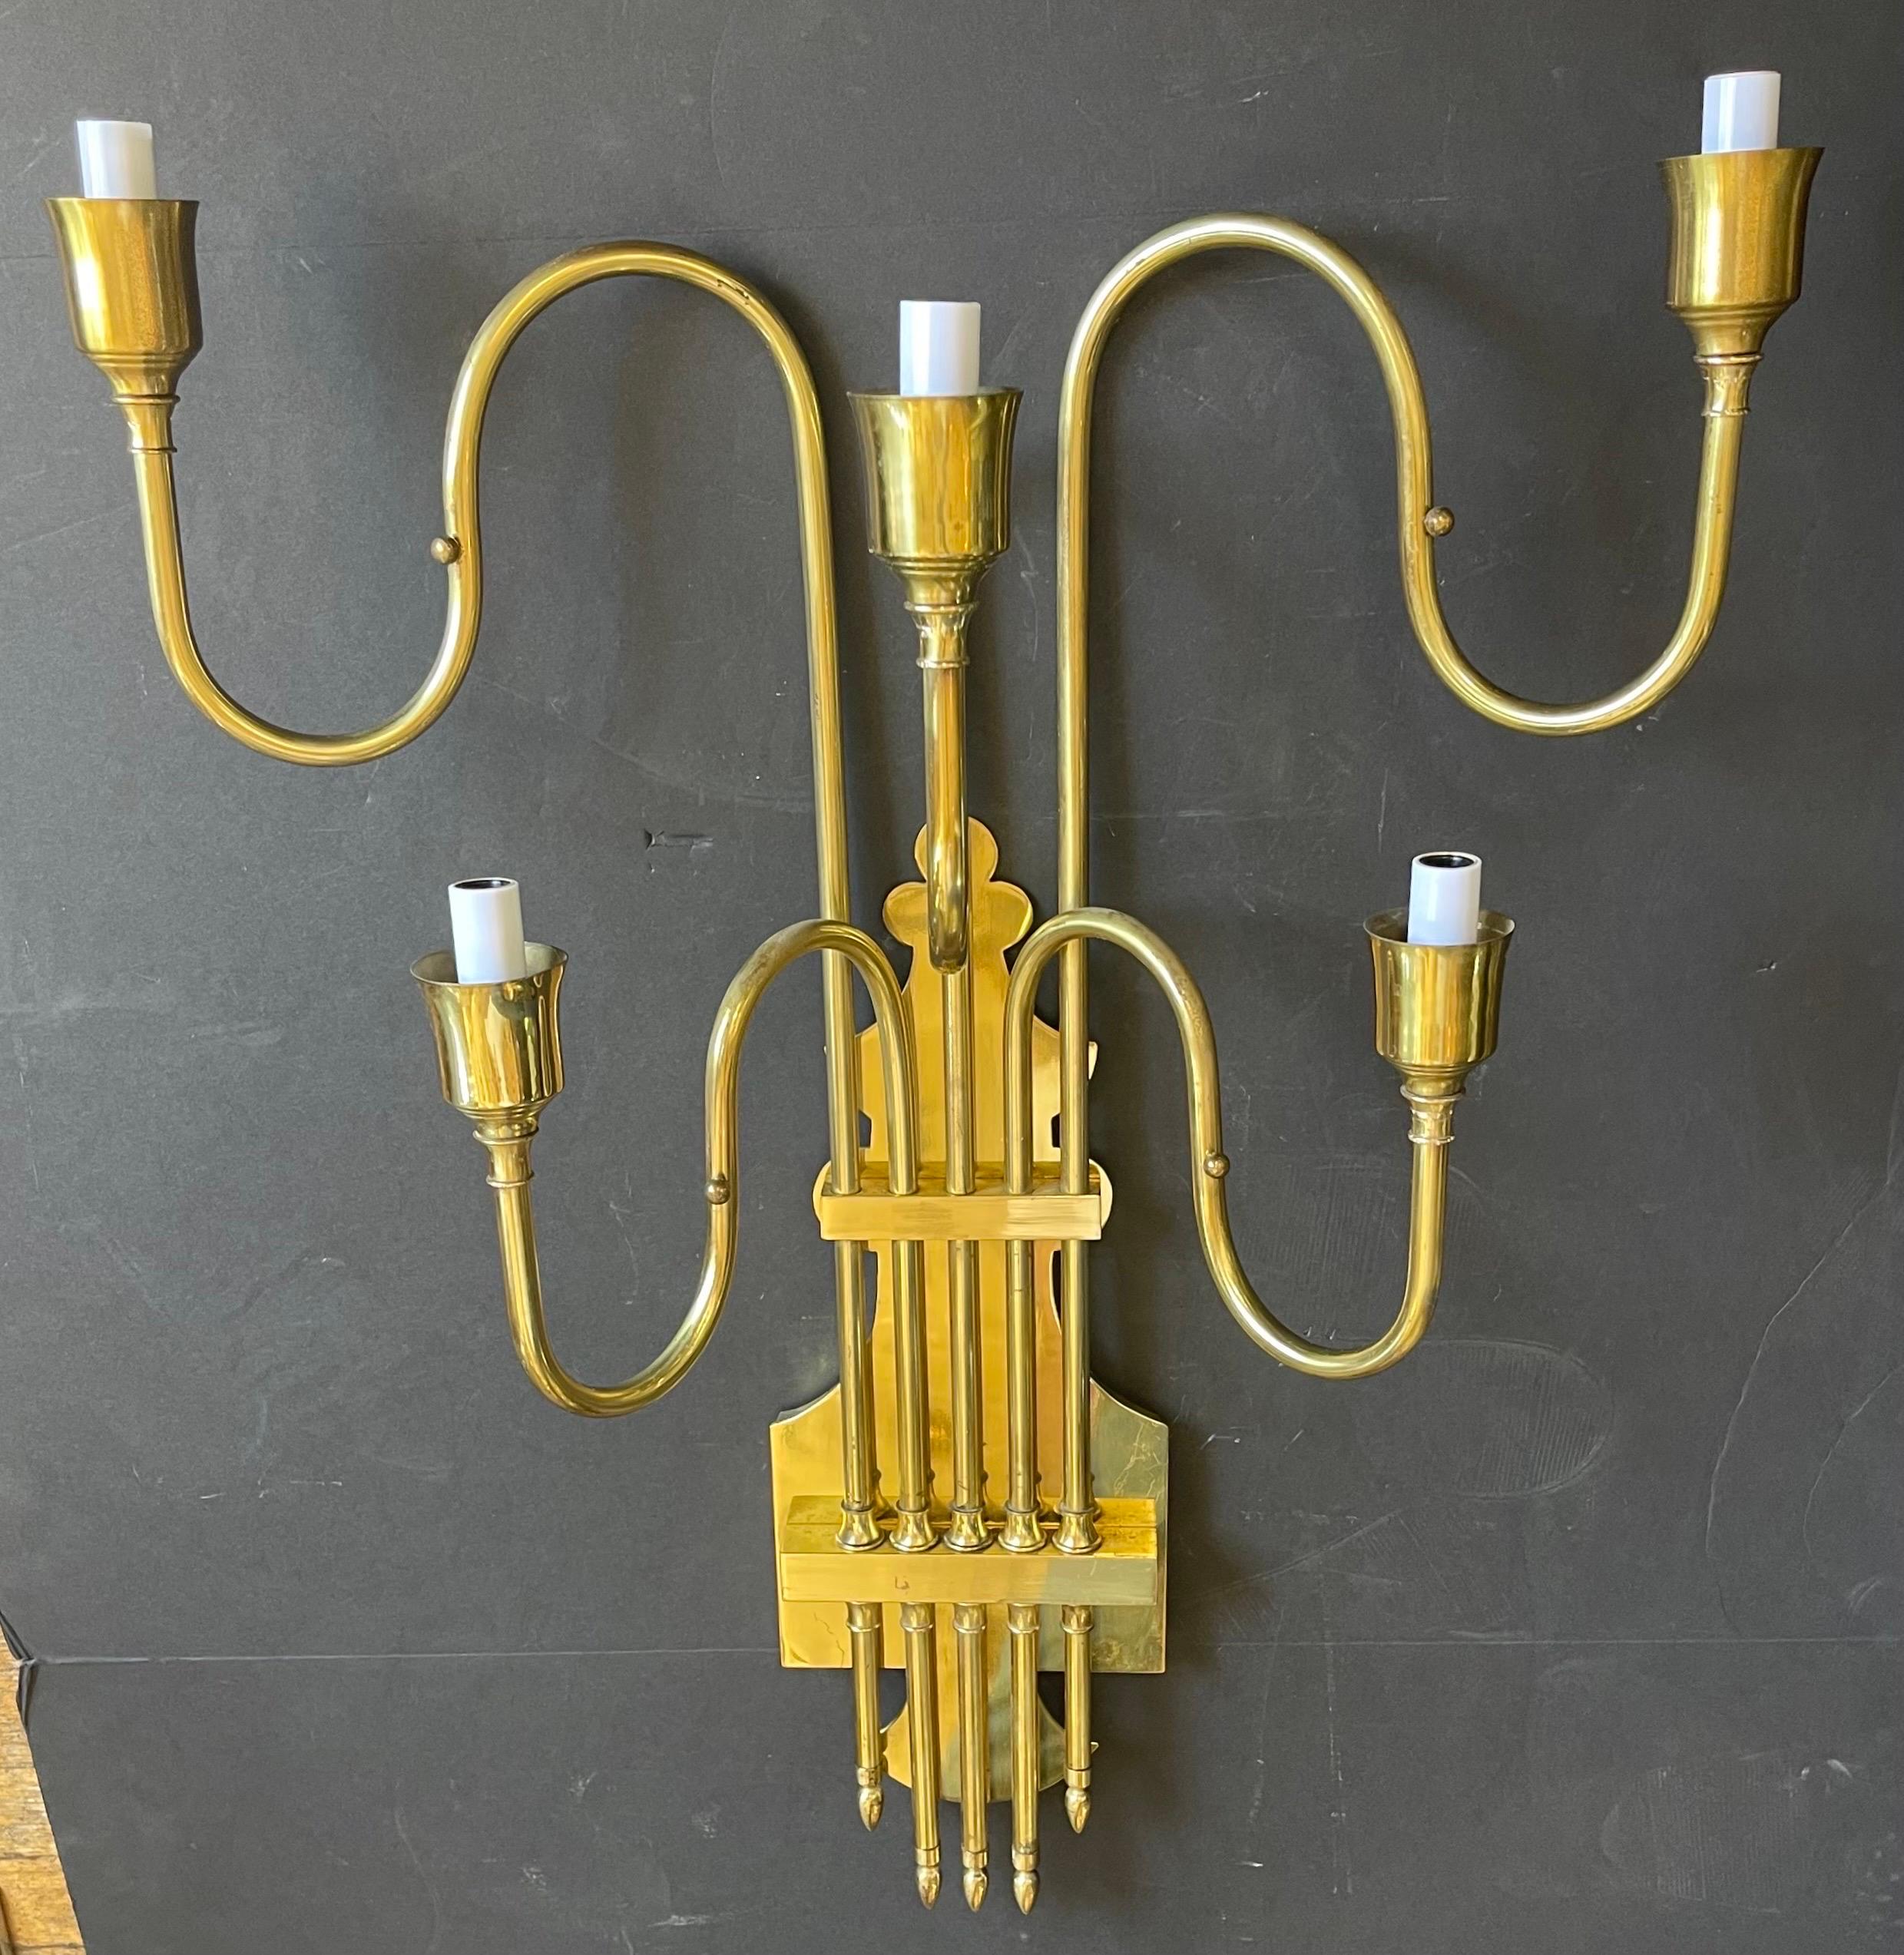 A wonderful large pair of 5 candelabra light Mid-Century Modern Tommi Parzinger style brass sconces
Dimensions: H 30